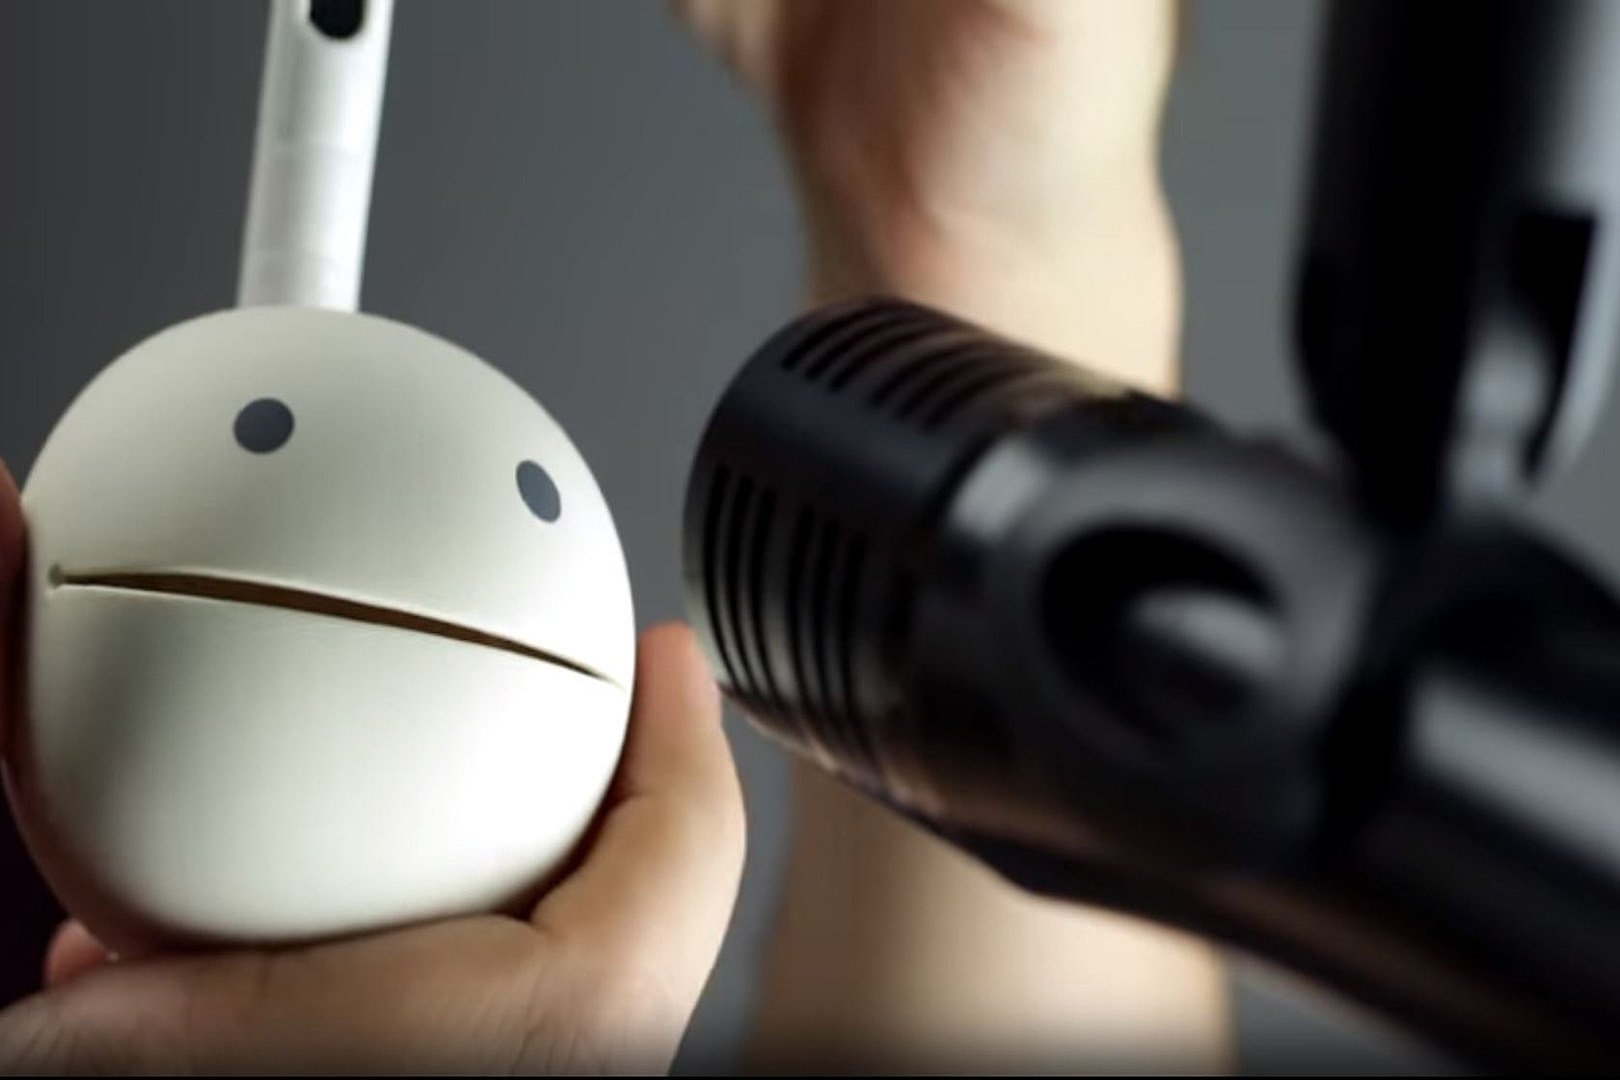 The Otamatone has been the star of a number of viral videos.<br><br>Become a viral sensation yourself after you buy one <a href="https://amzn.to/2POBRf6" "nofollow" target="_blank">here</a>.